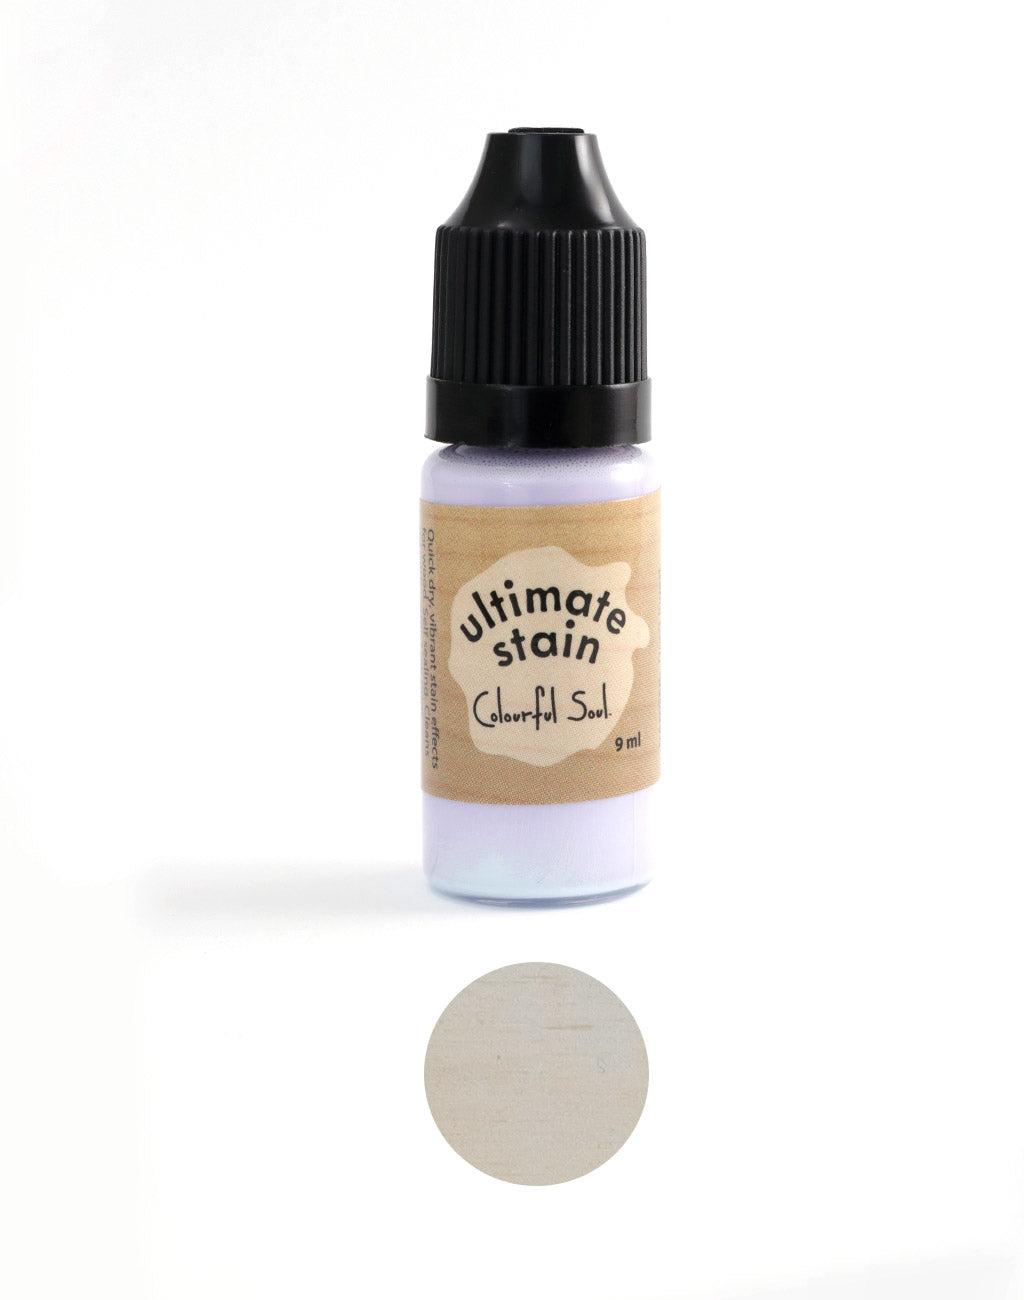 Ultimate Stain, Faded Lavender (9mL)